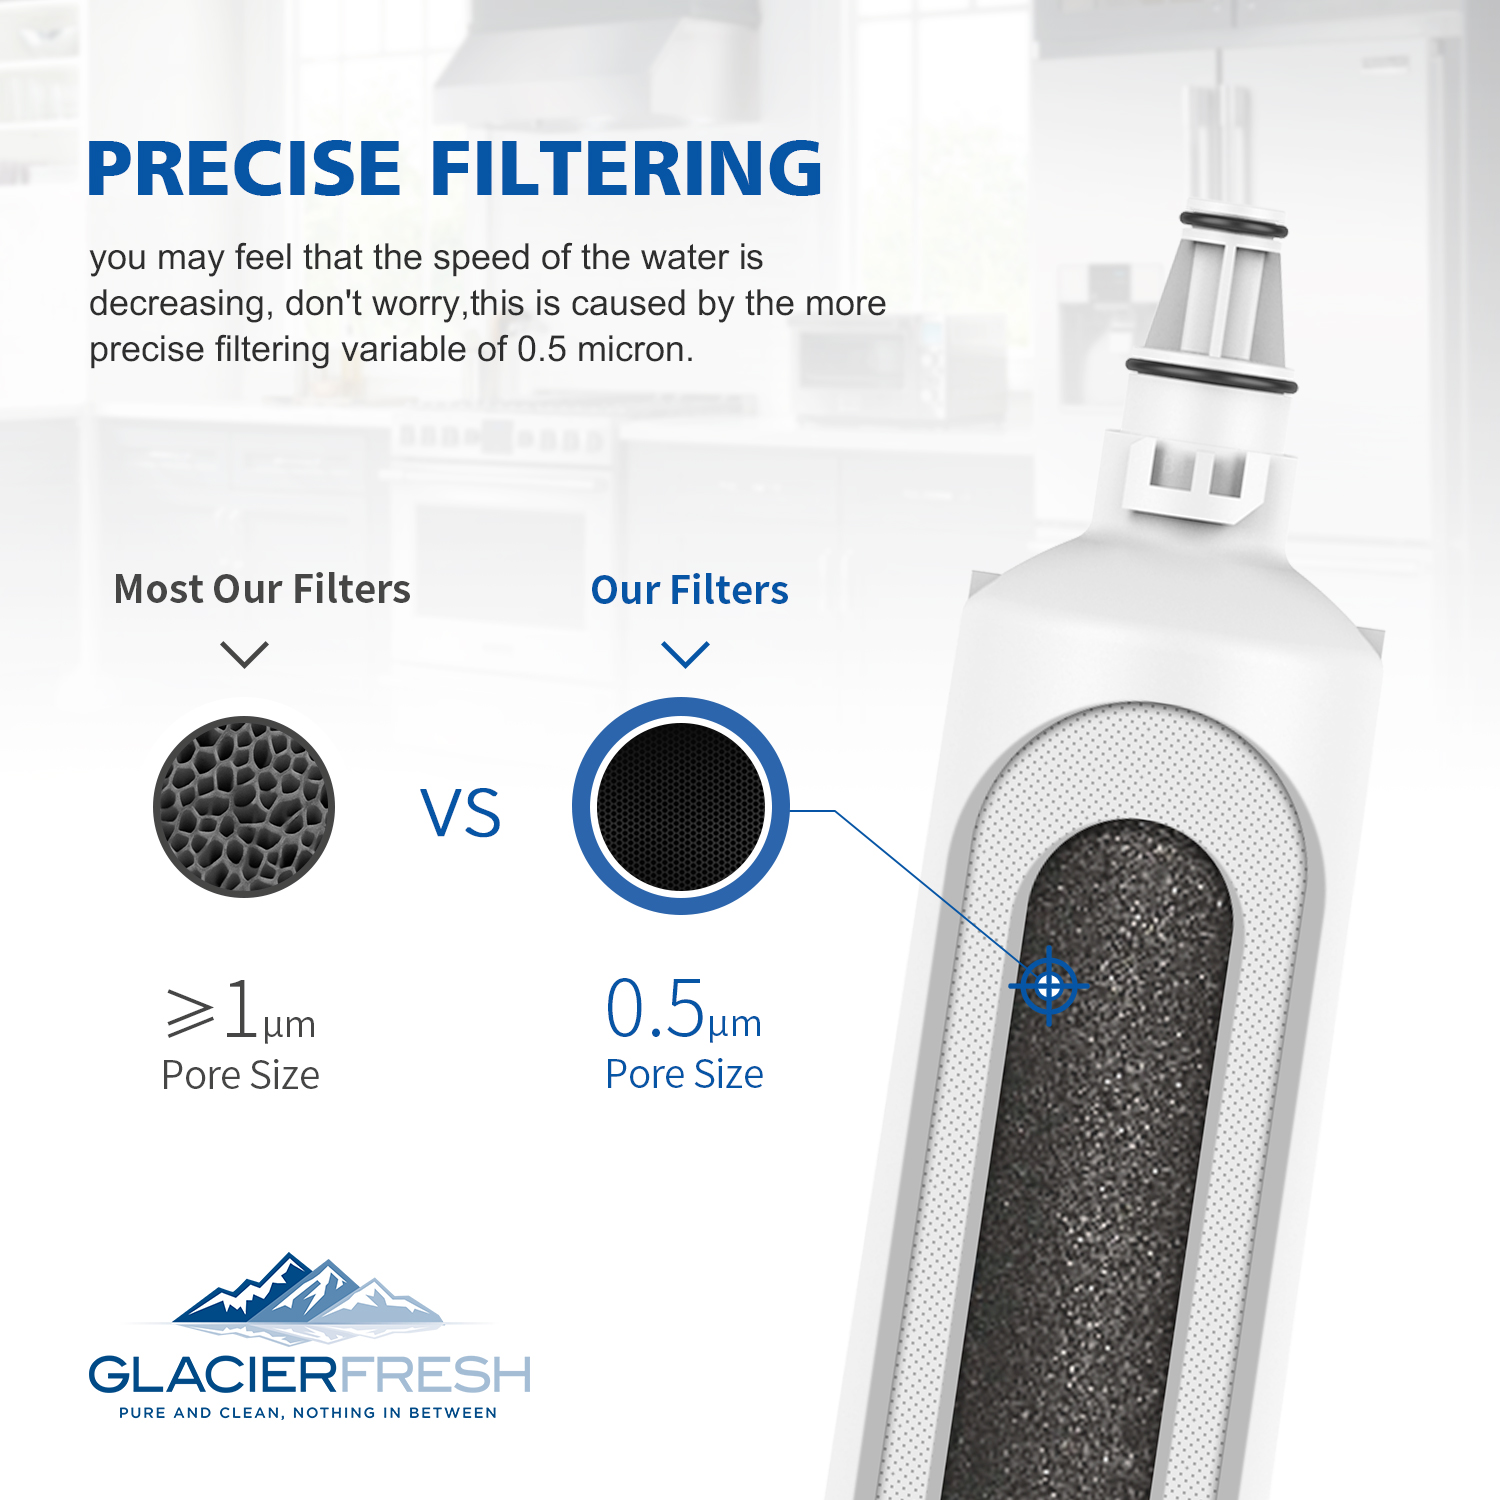 GLACIER FRESH 7012333 Ice Maker Water Filter, Compatible with Sub-Zero 7012333 Water Filter, UC-15 Ice Maker Water Filter Replacement, Manitowoc K00374 (1 Pack) - image 4 of 6